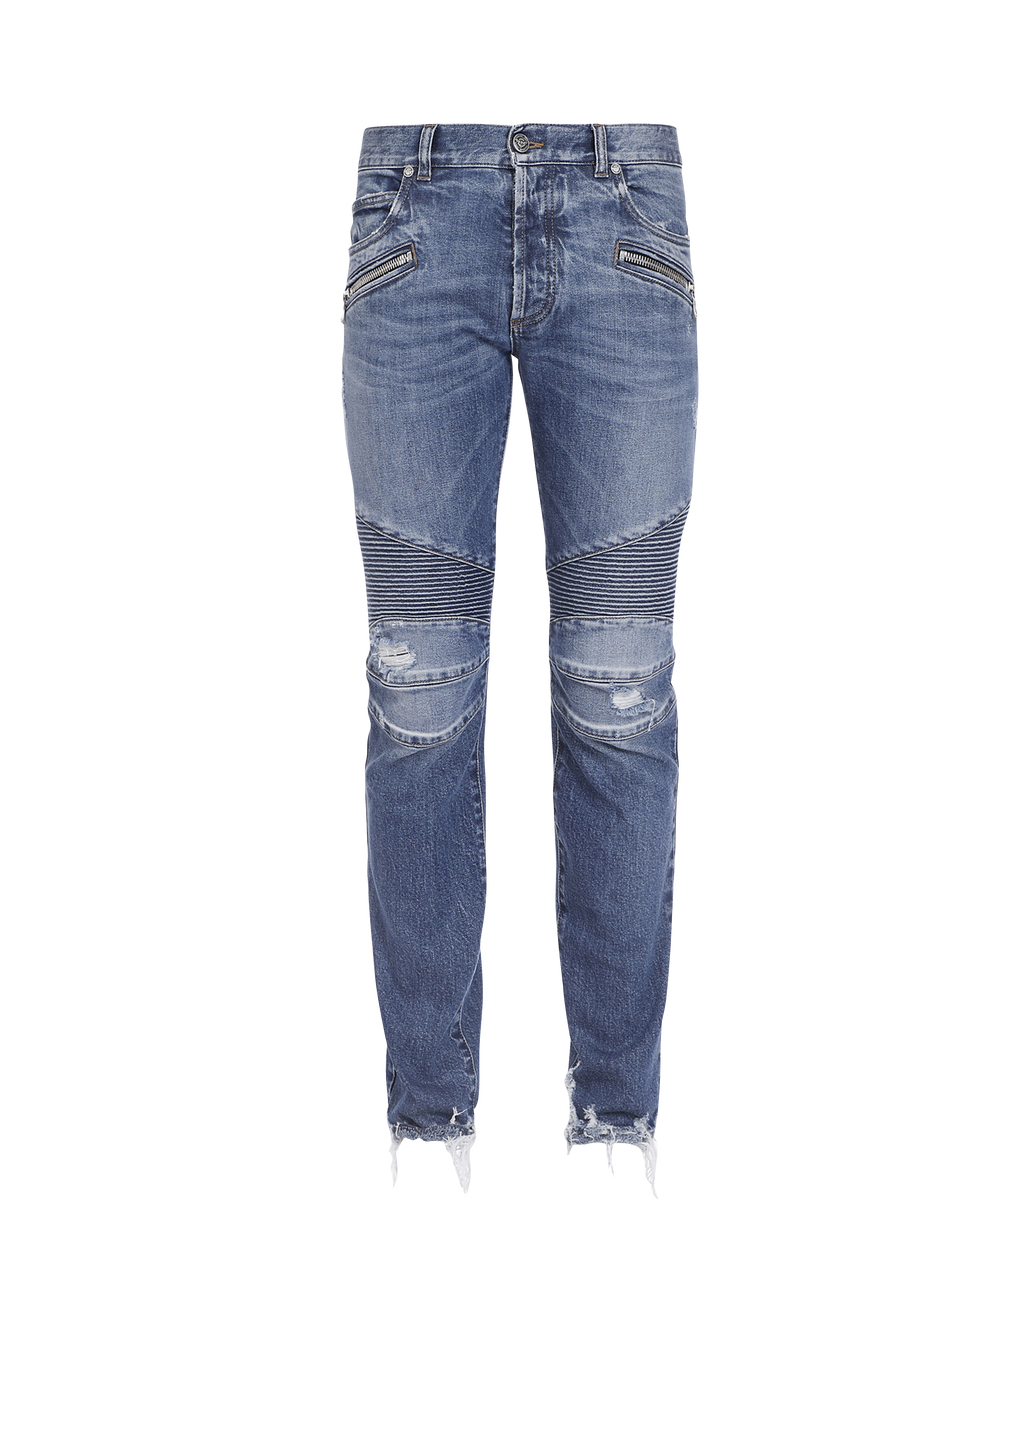 Tapered ripped blue cotton jeans, blue, hi-res